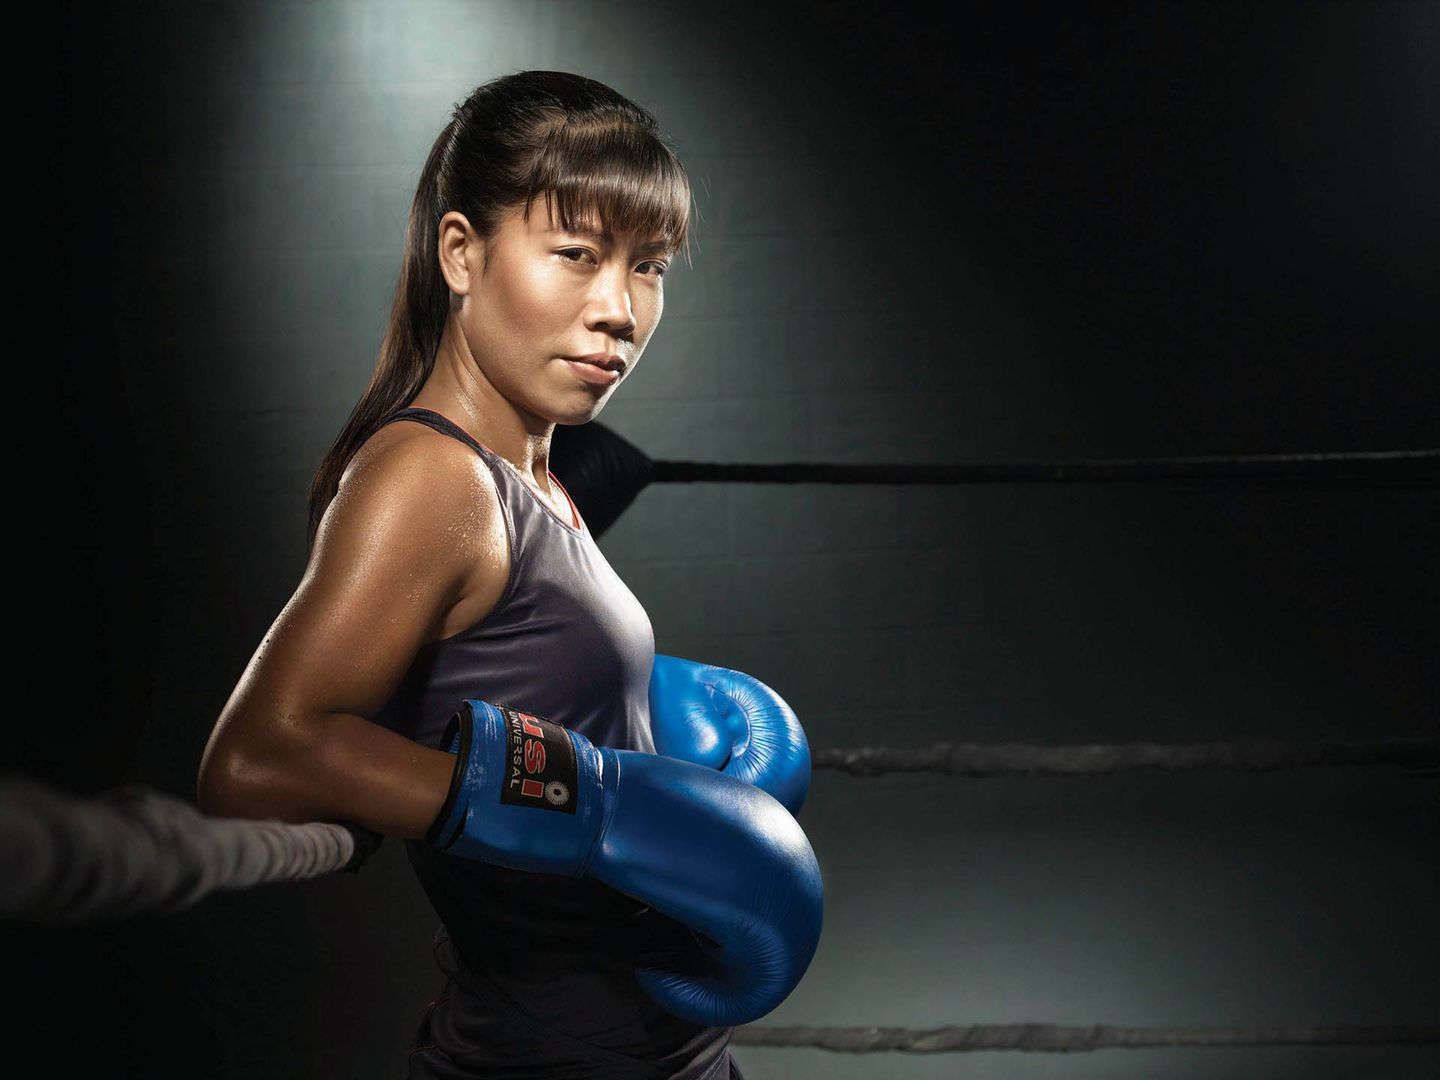 Mary Kom (Indian Boxer) - Age, Height, Net Worth, Biography